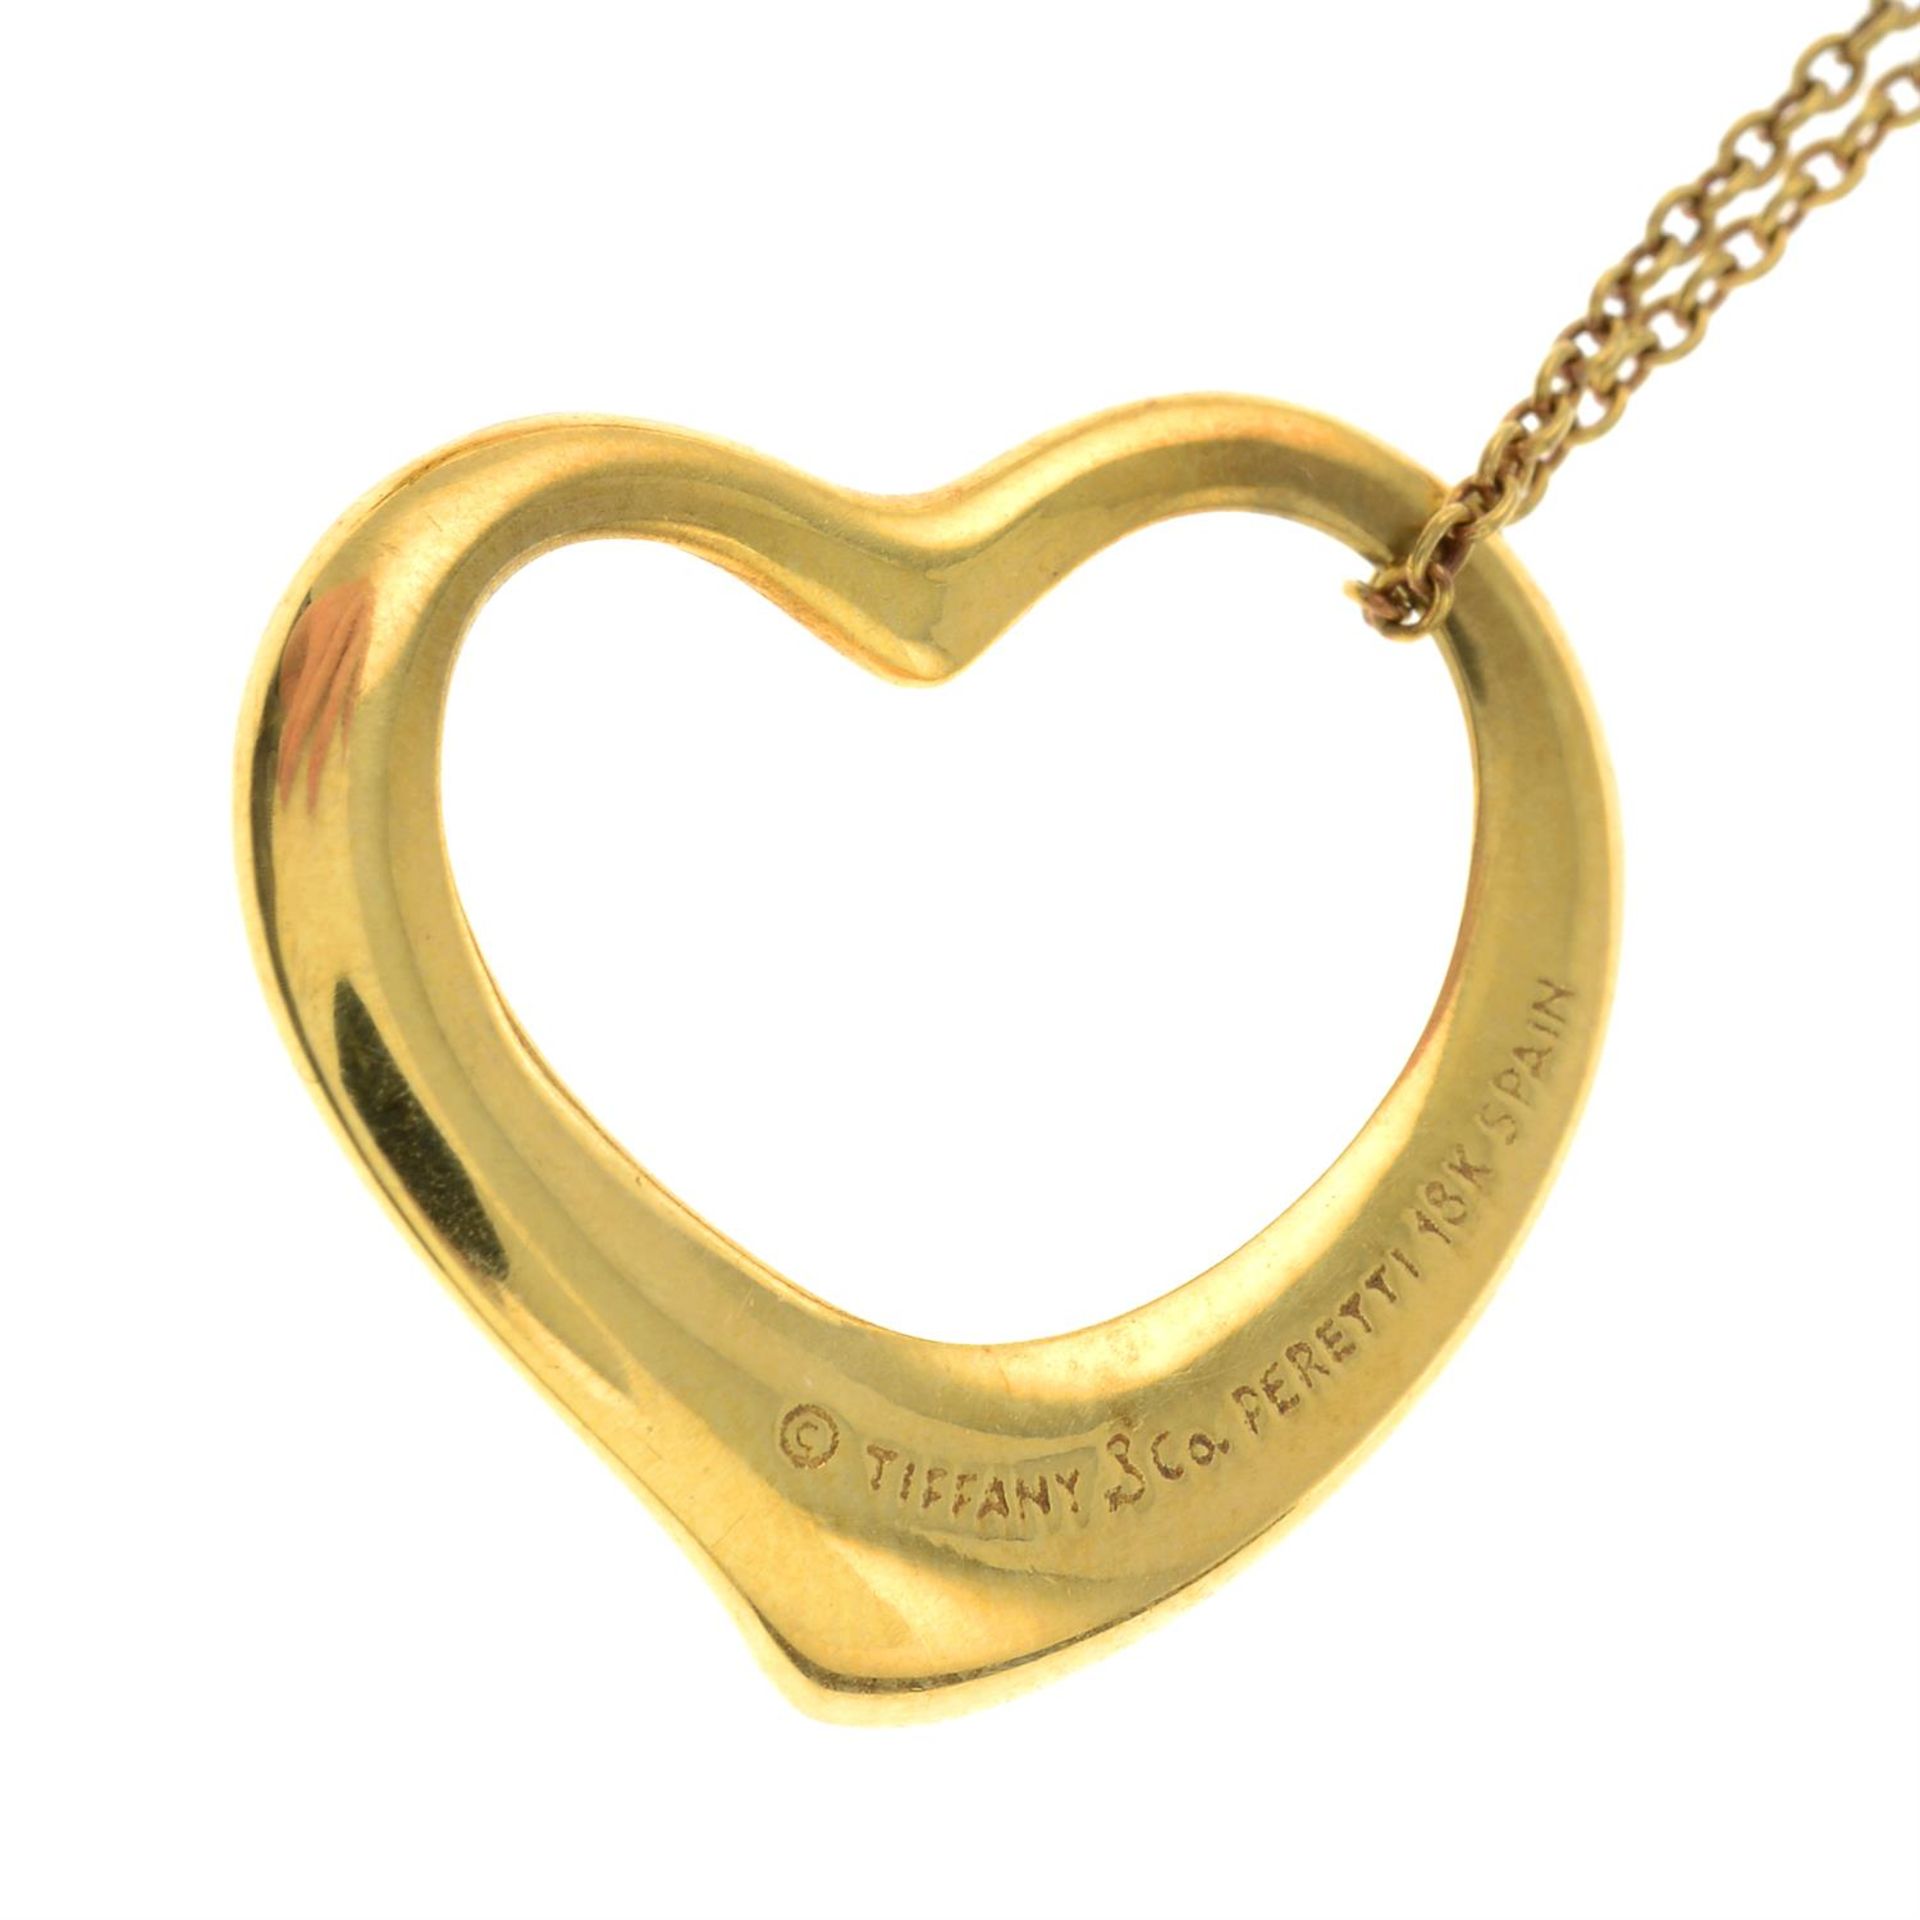 An 'Open Heart' pendant, with chain, by Elsa Peretti for Tiffany & Co. - Image 3 of 4